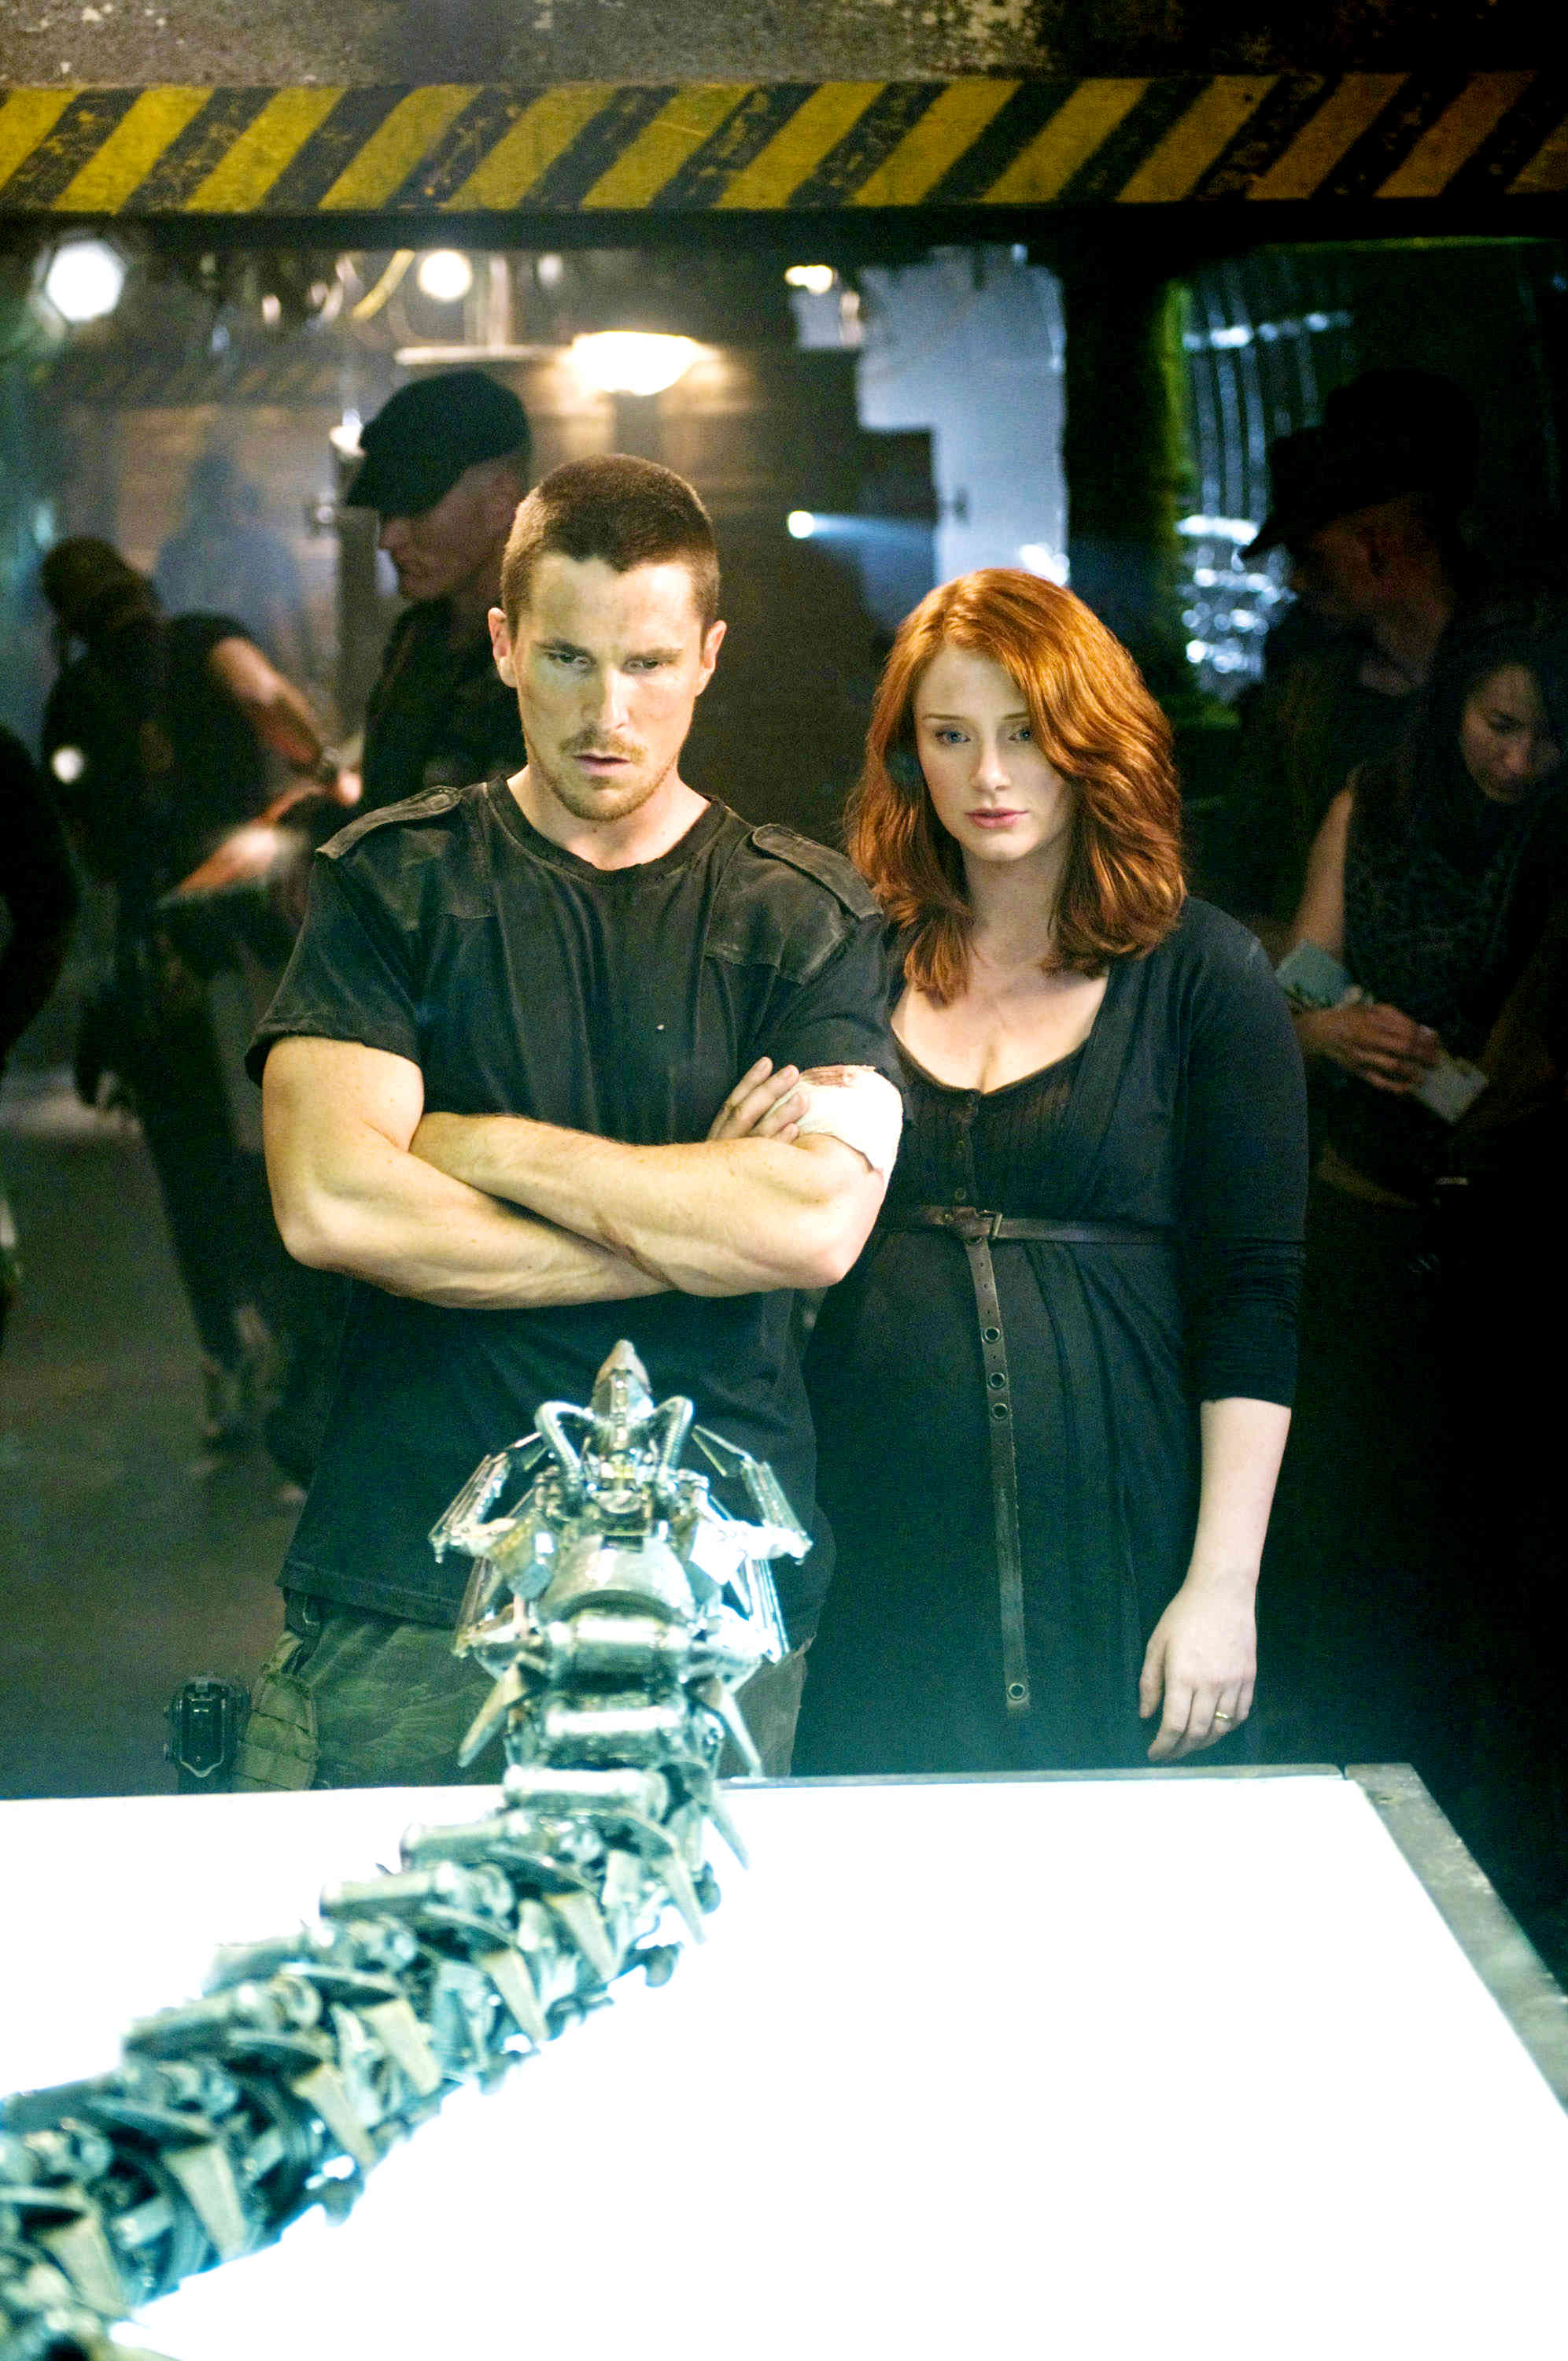 Christian Bale stars as John Connor and Bryce Dallas Howard stars as Kate Connor in Warner Bros. Pictures' Terminator Salvation (2009). Photo credit by Richard Foreman.